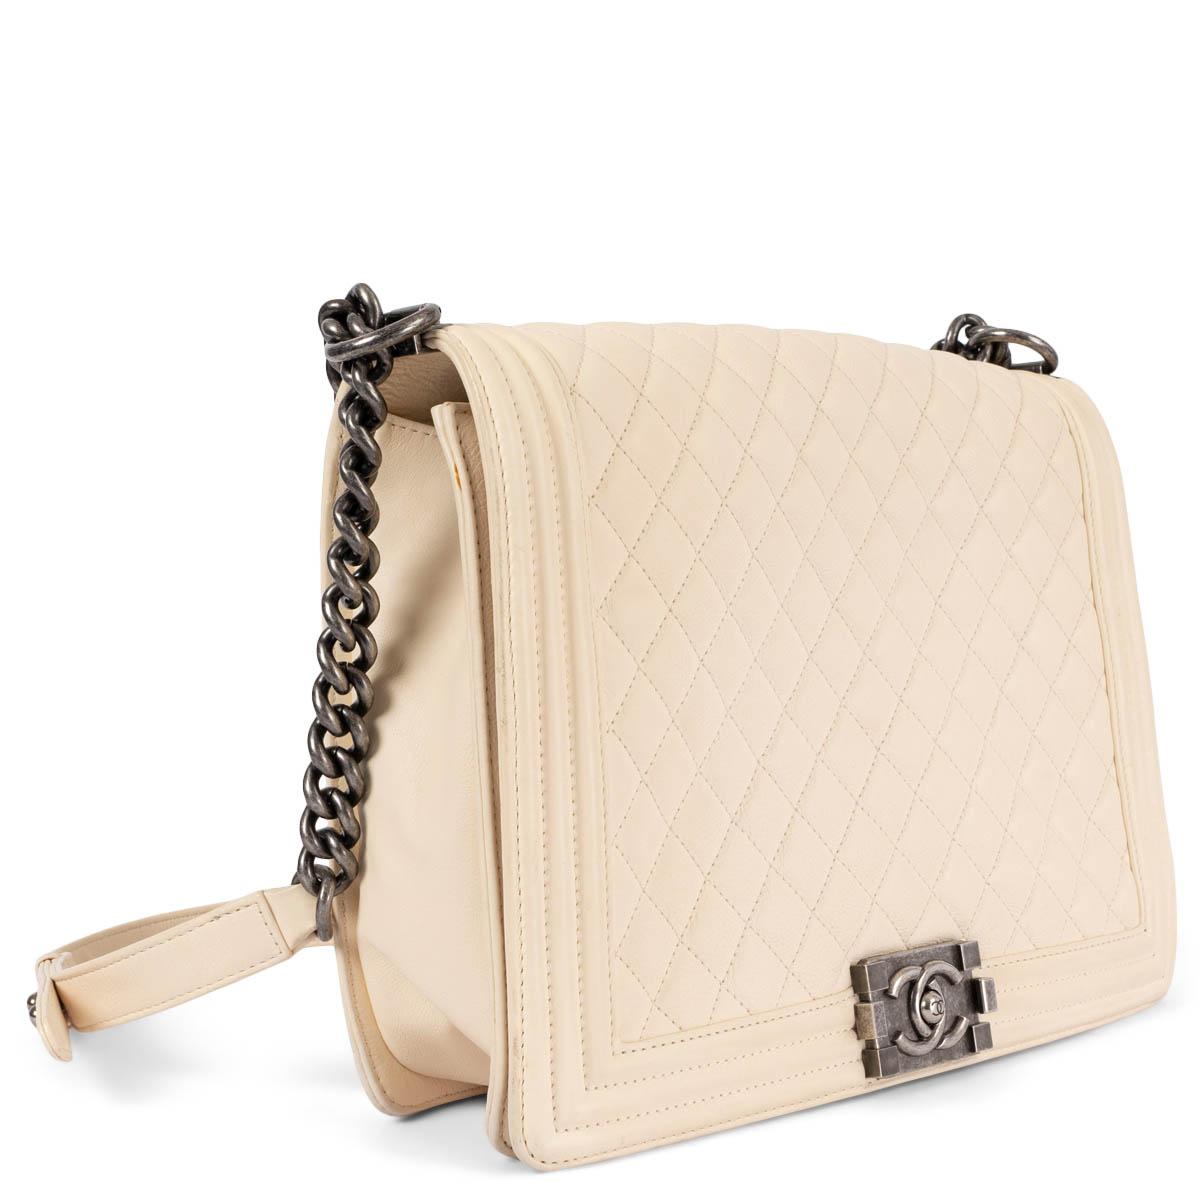 100% authentic Chanel (old) Large Boy flap bag in cream quilted lambskin leather with Ruthenium (anitque silver) hardware. Features a leather and chain strap. Closes with a Boy metal lock on the front. Lined in black grosgrain fabric with two open